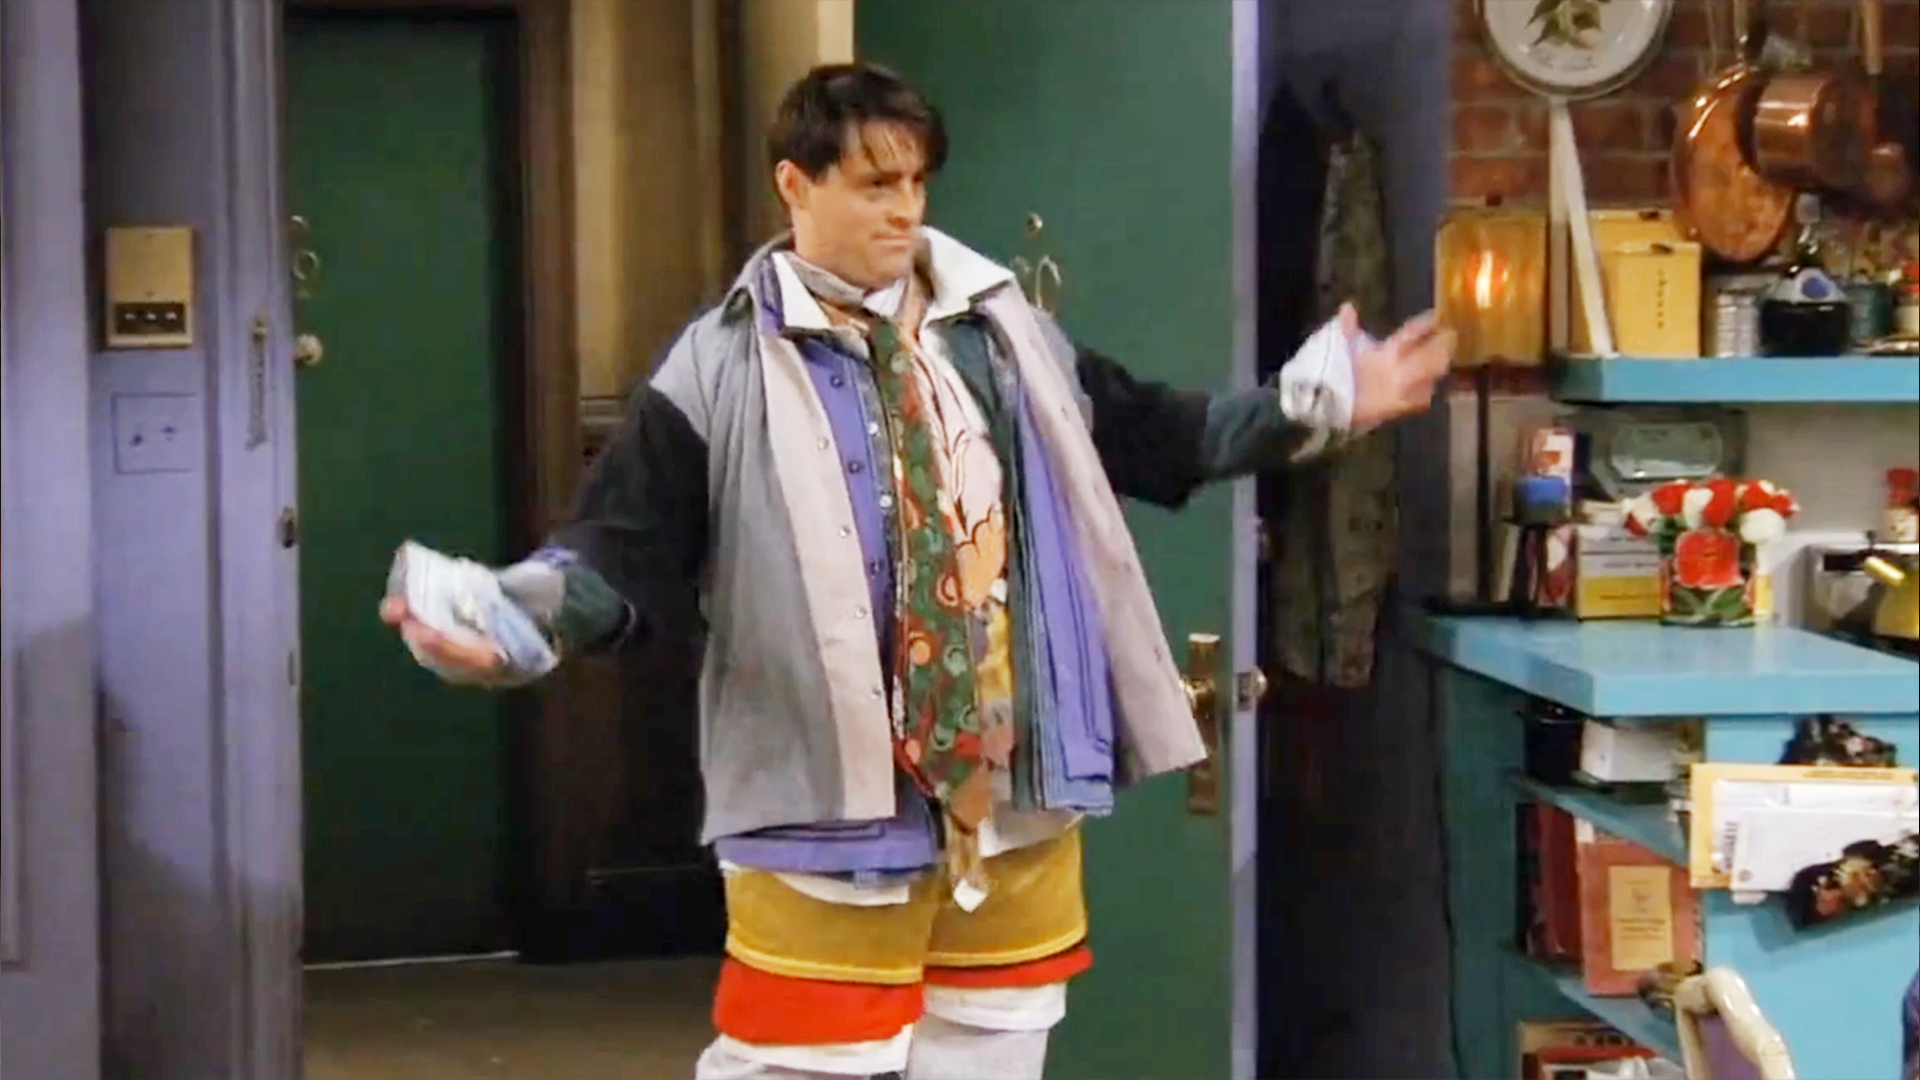 Joey could not BE wearing anymore clothes in this scene